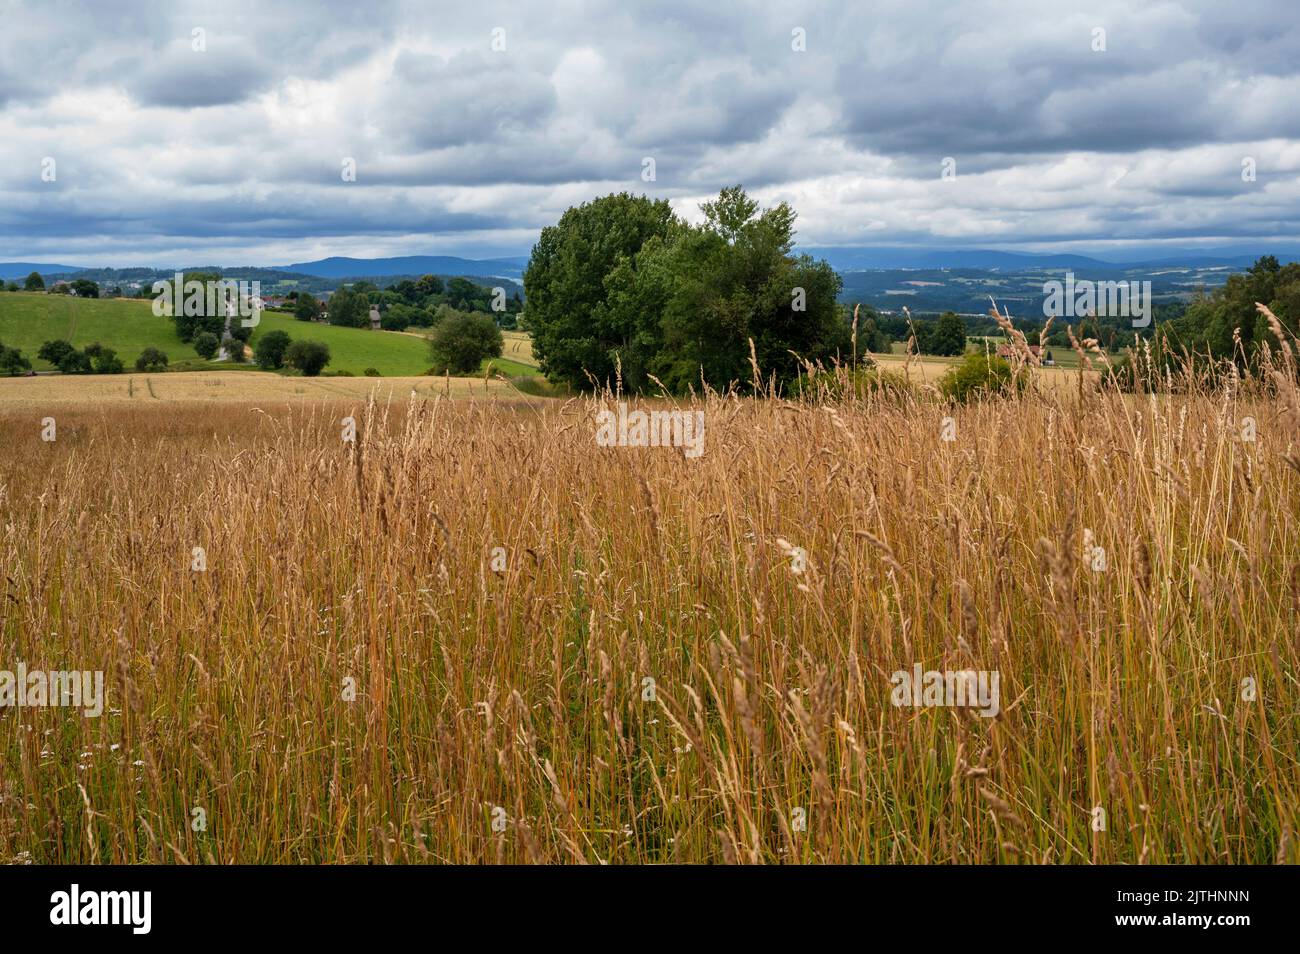 Rural landscape.Tall grass on meadow, field, tree, village and mountain on horizon in cloudy summer day. Near village Dlouhy in Czech Paradise,Czechia. Stock Photo